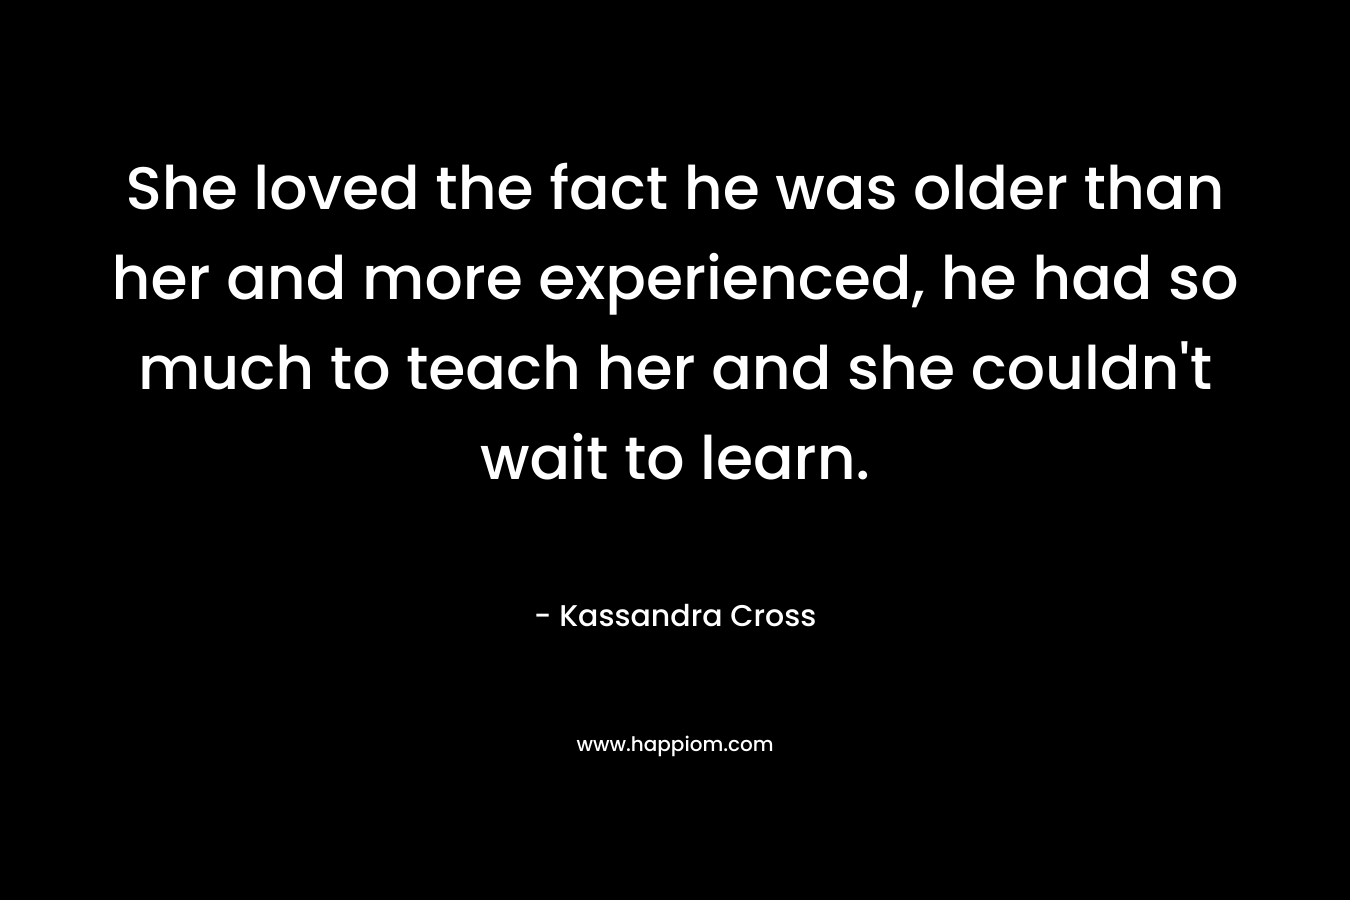 She loved the fact he was older than her and more experienced, he had so much to teach her and she couldn't wait to learn.